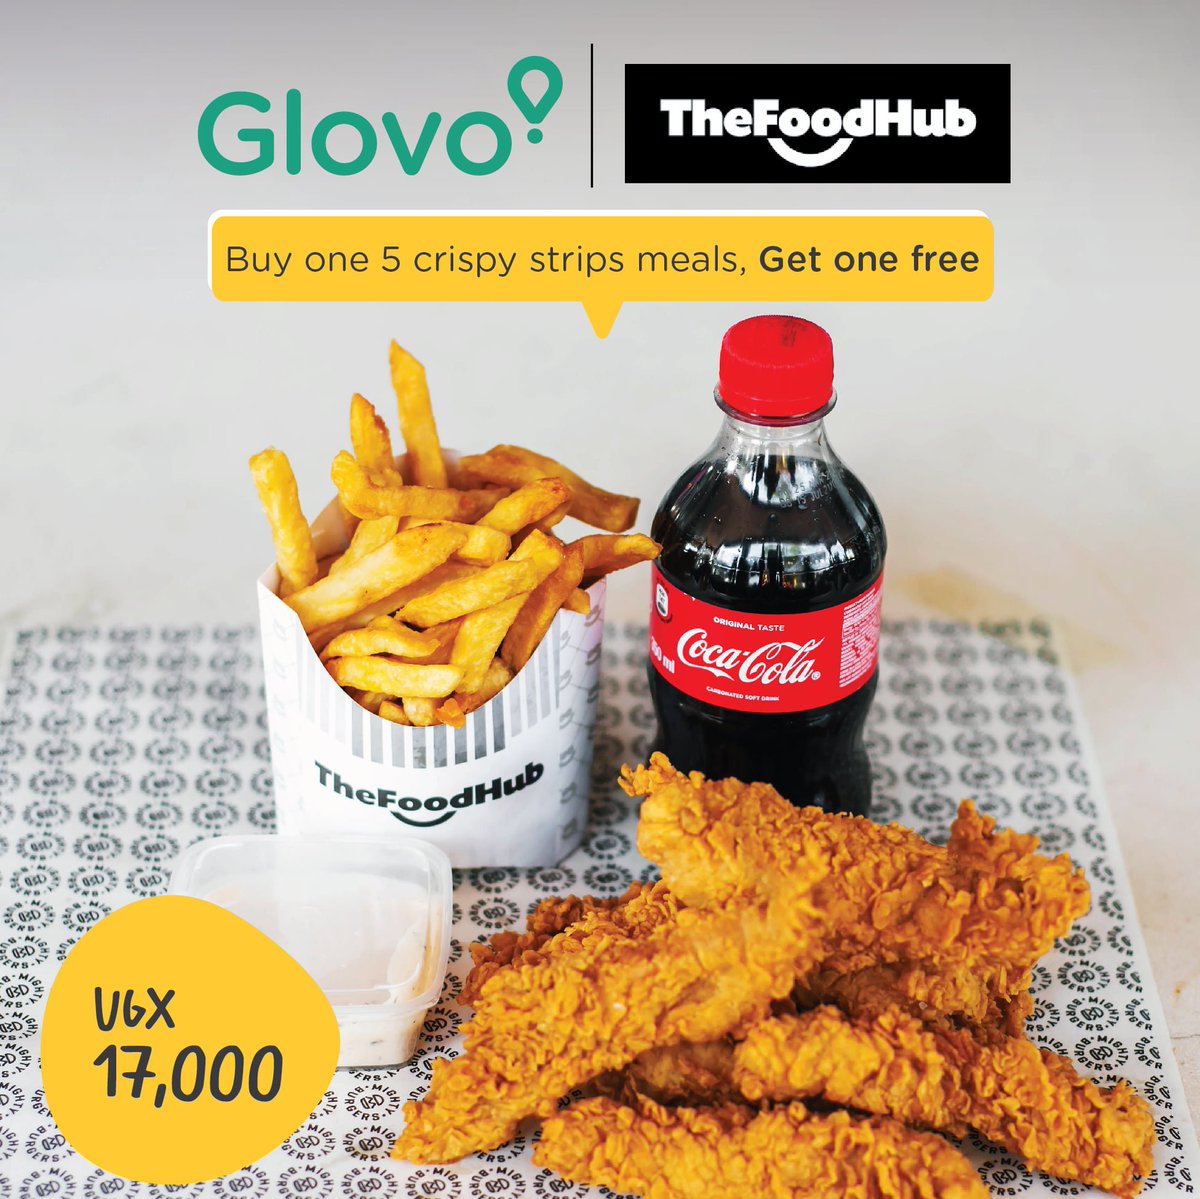 #AD Enjoy Crazy Deals on Glovo. Buy 5 crispy strips meal and get one free at only 17K from Food Hub. Get a free delivery for your next order if your delivery takes longer than an hour.This means that you will pay for the order but your next order using the app will be at no cost.